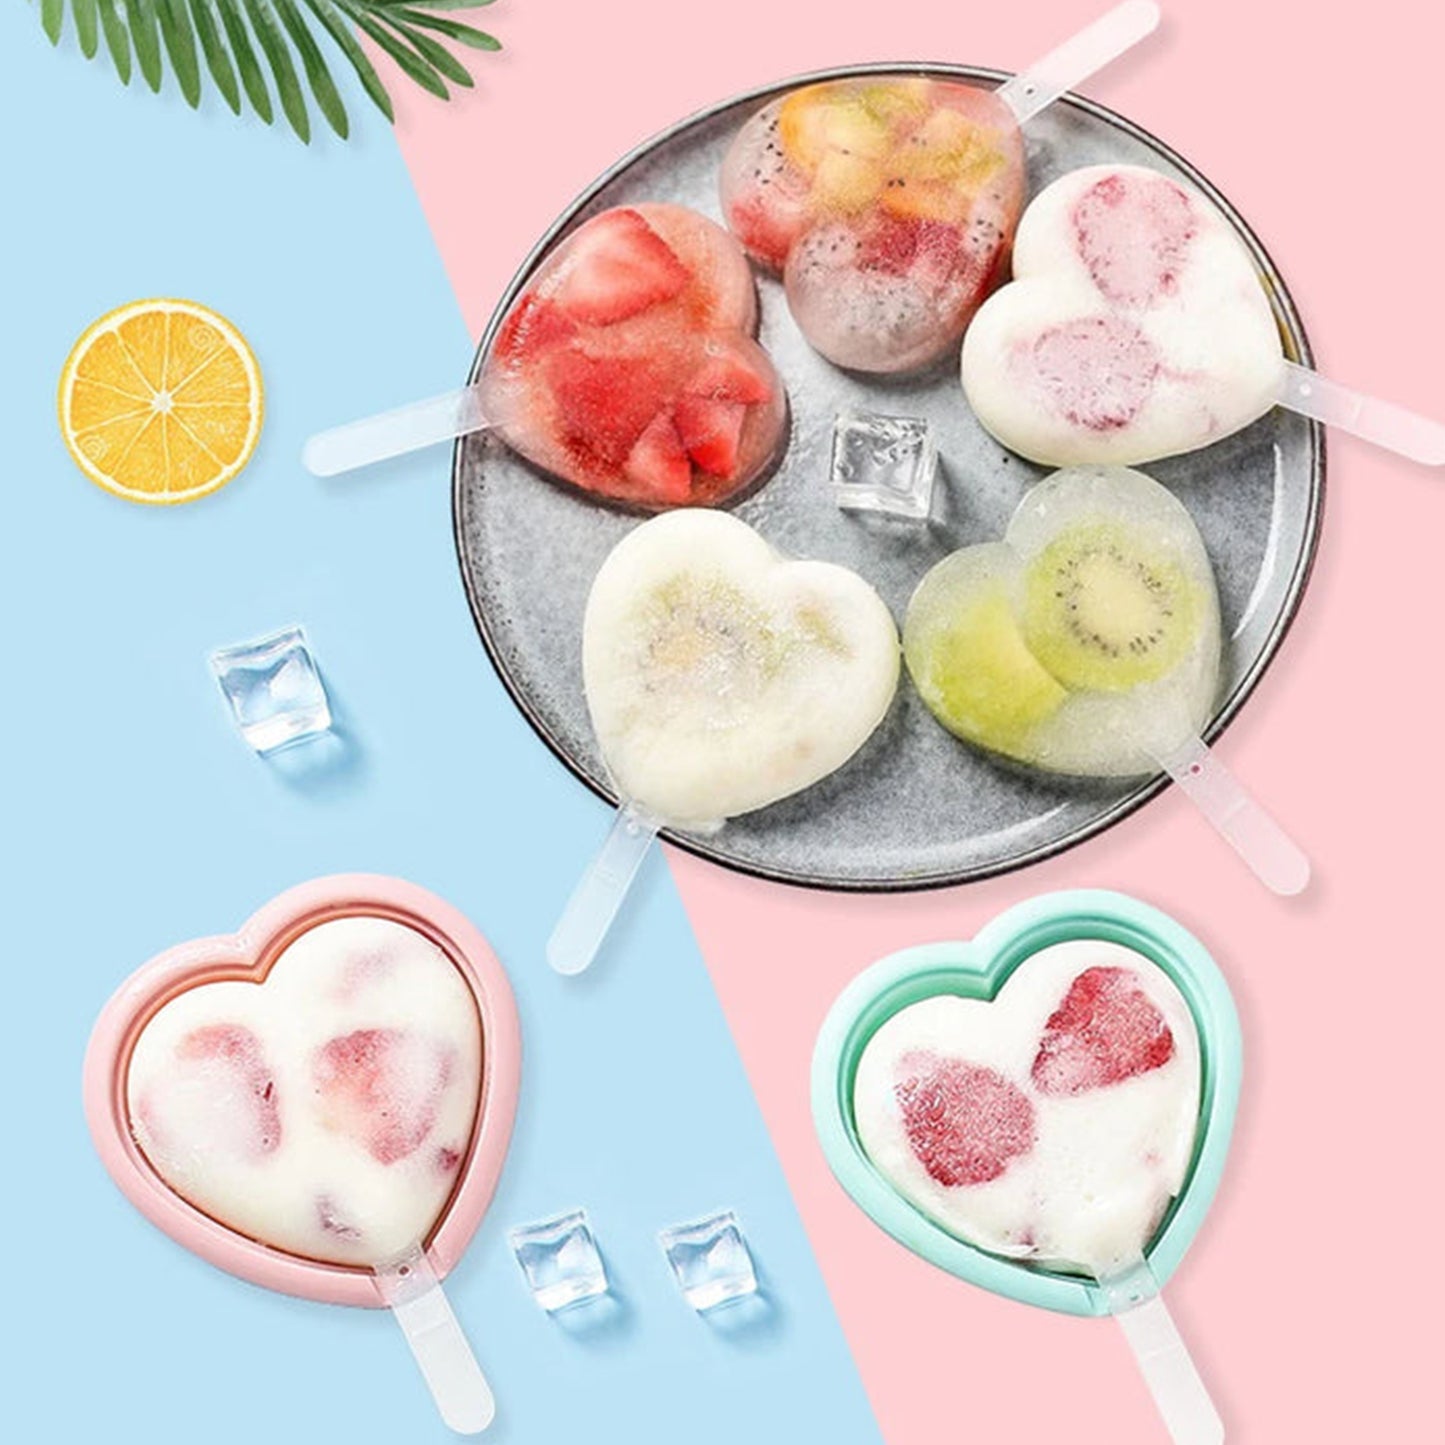 Heart & Striped Shaped Silicone Popsicles Molds (Set of 4)